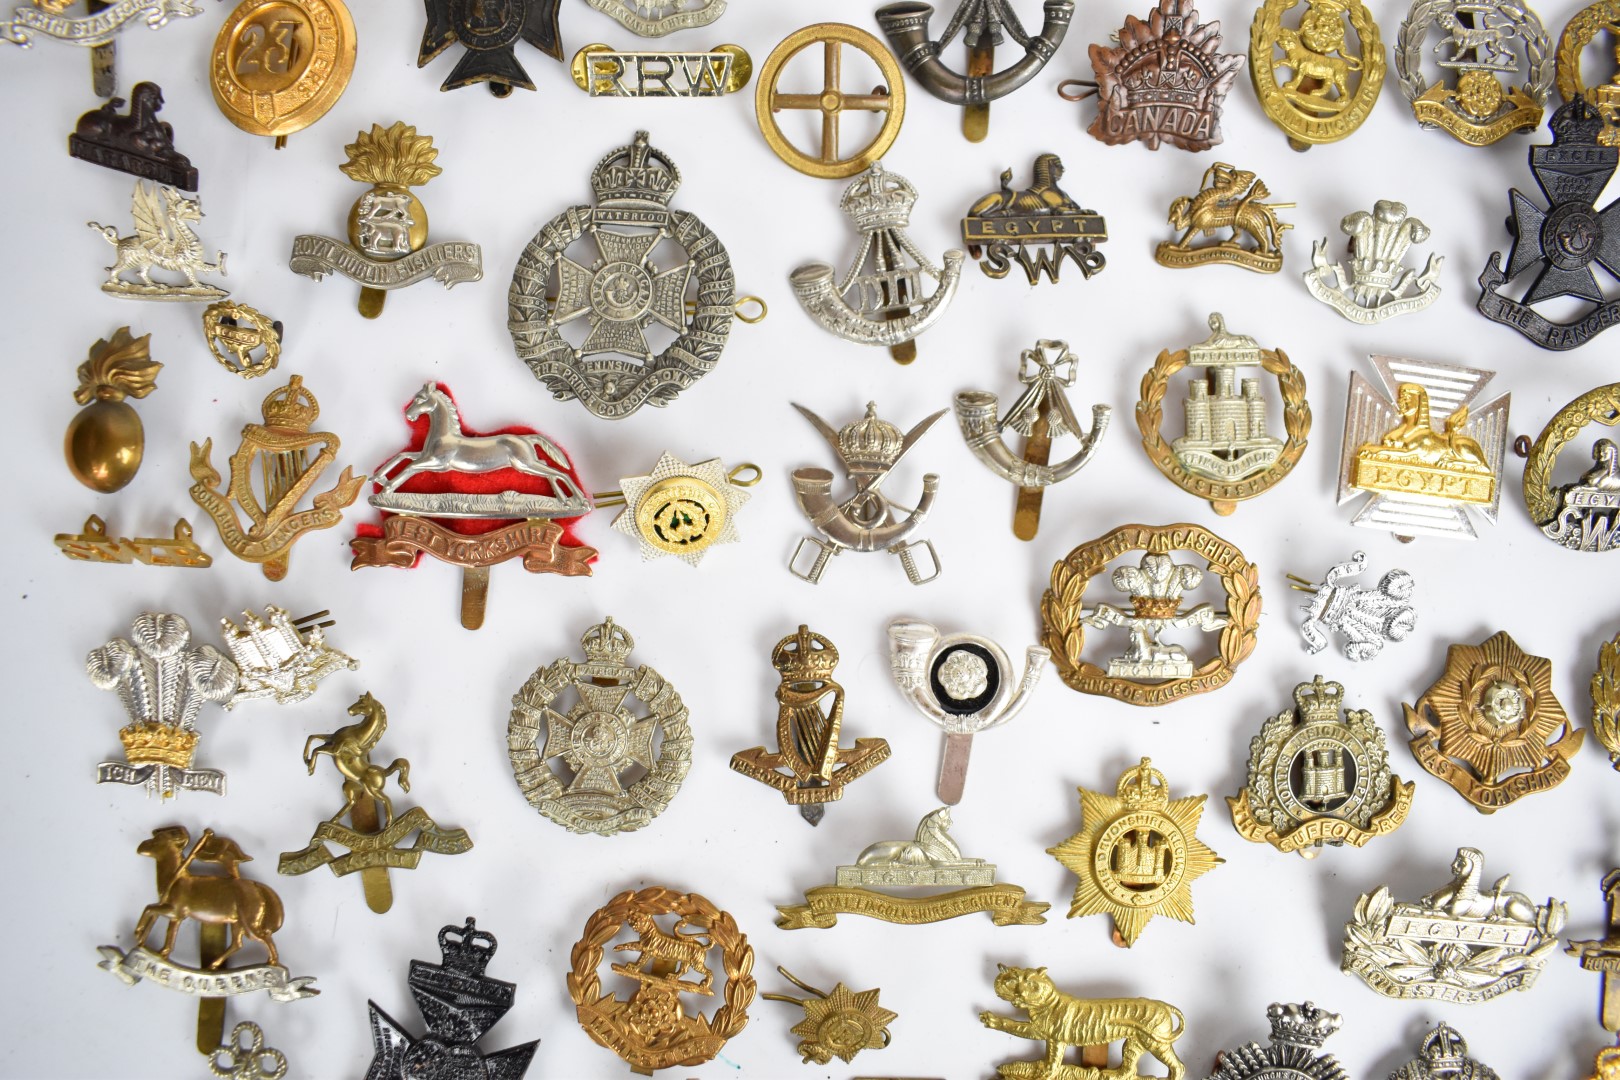 Large collection of approximately 100 British Army cap badges including Royal Sussex Regiment, - Image 5 of 14